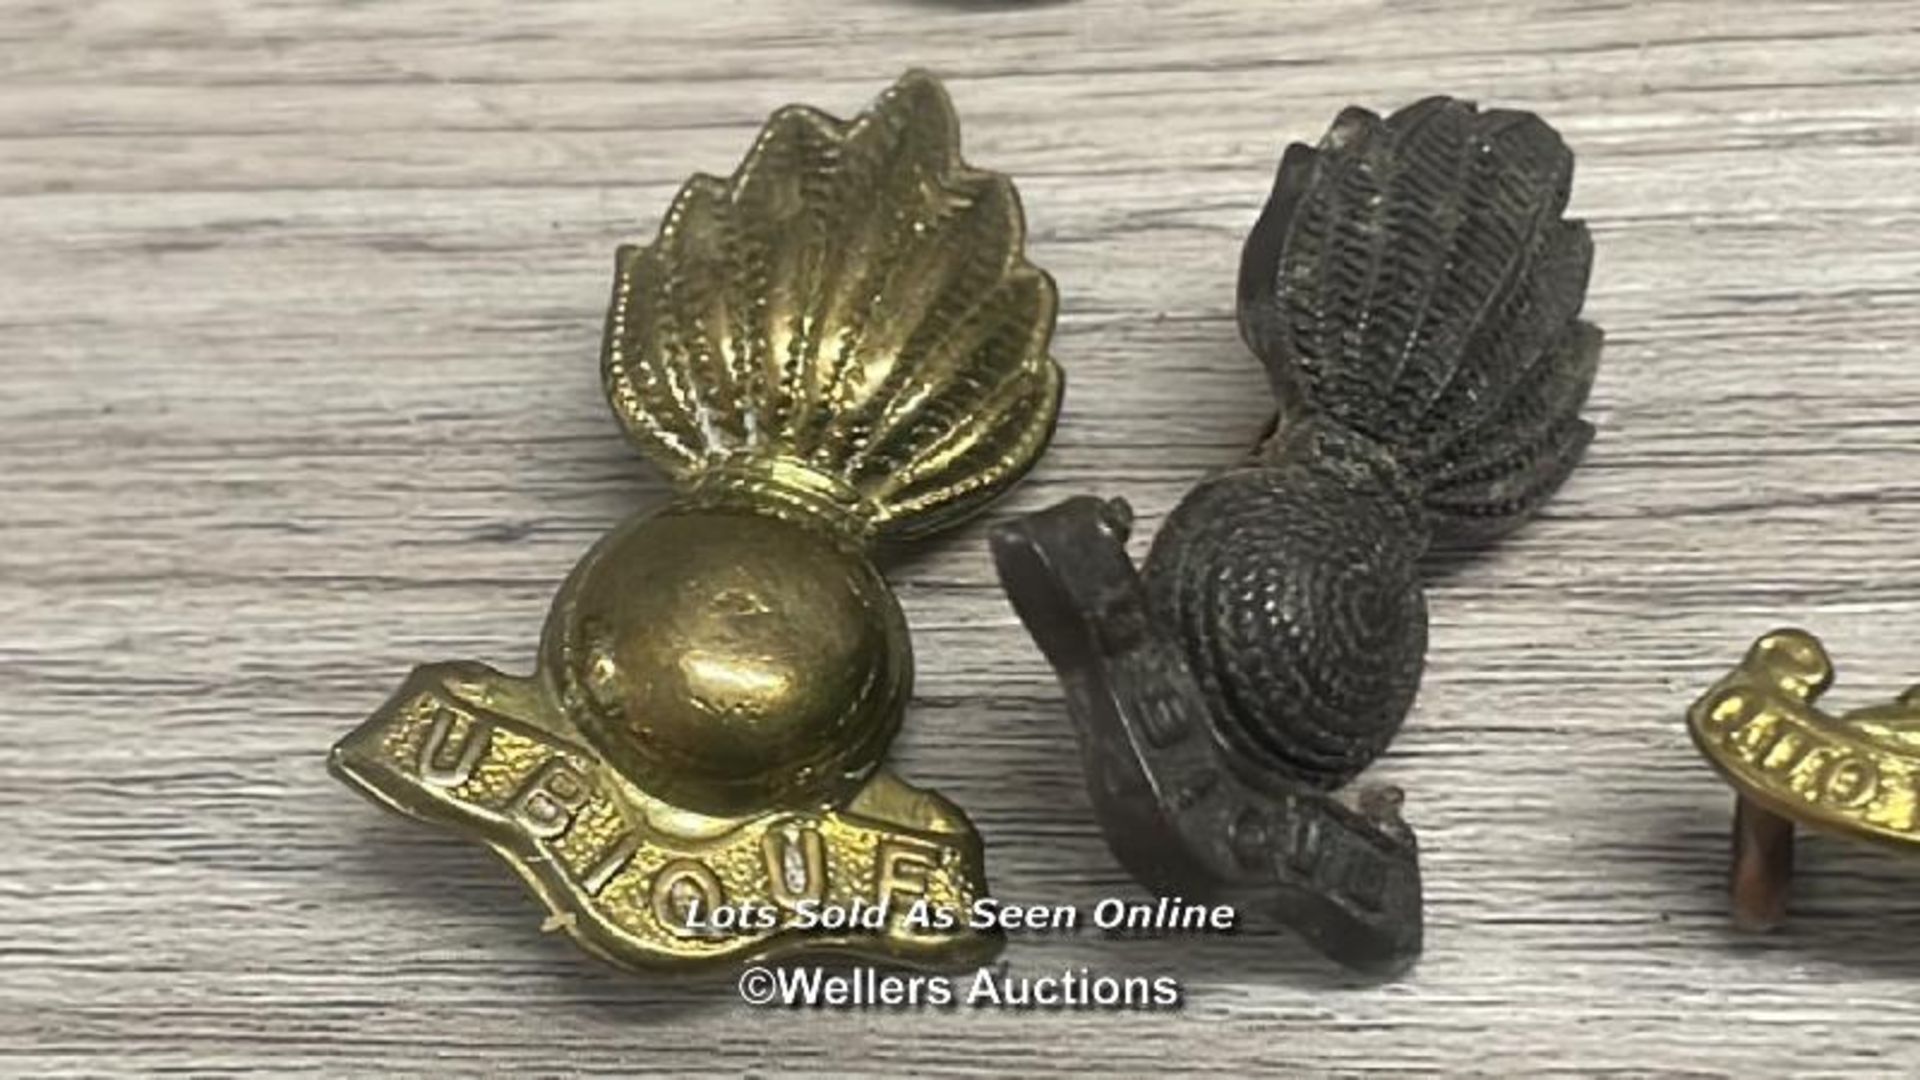 COLLECTION OF MILITARY BADGES INCLUDING ONE WWII GERMAN BUTTON - Image 7 of 9